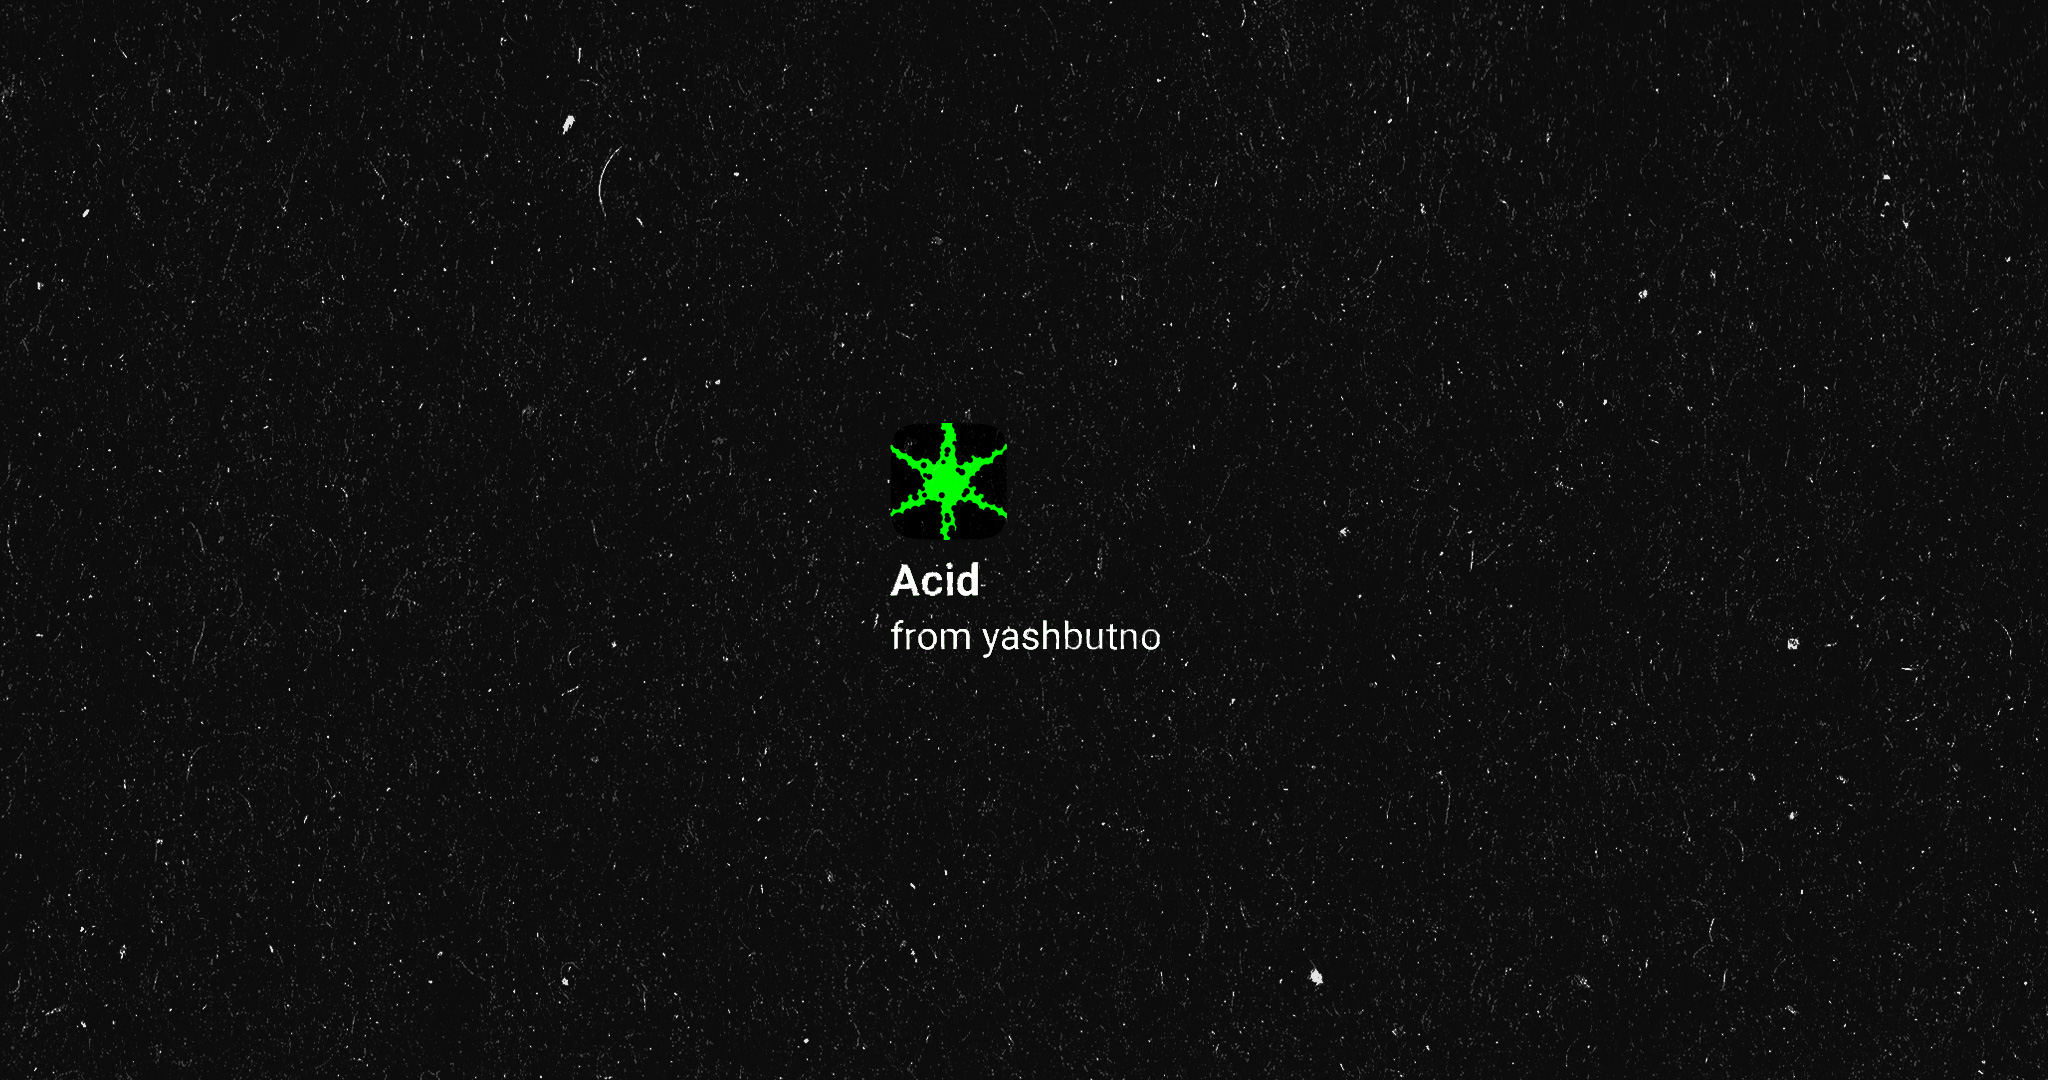 The Acid icon, title, and author credit. Image reads: Acid from yashbutno.